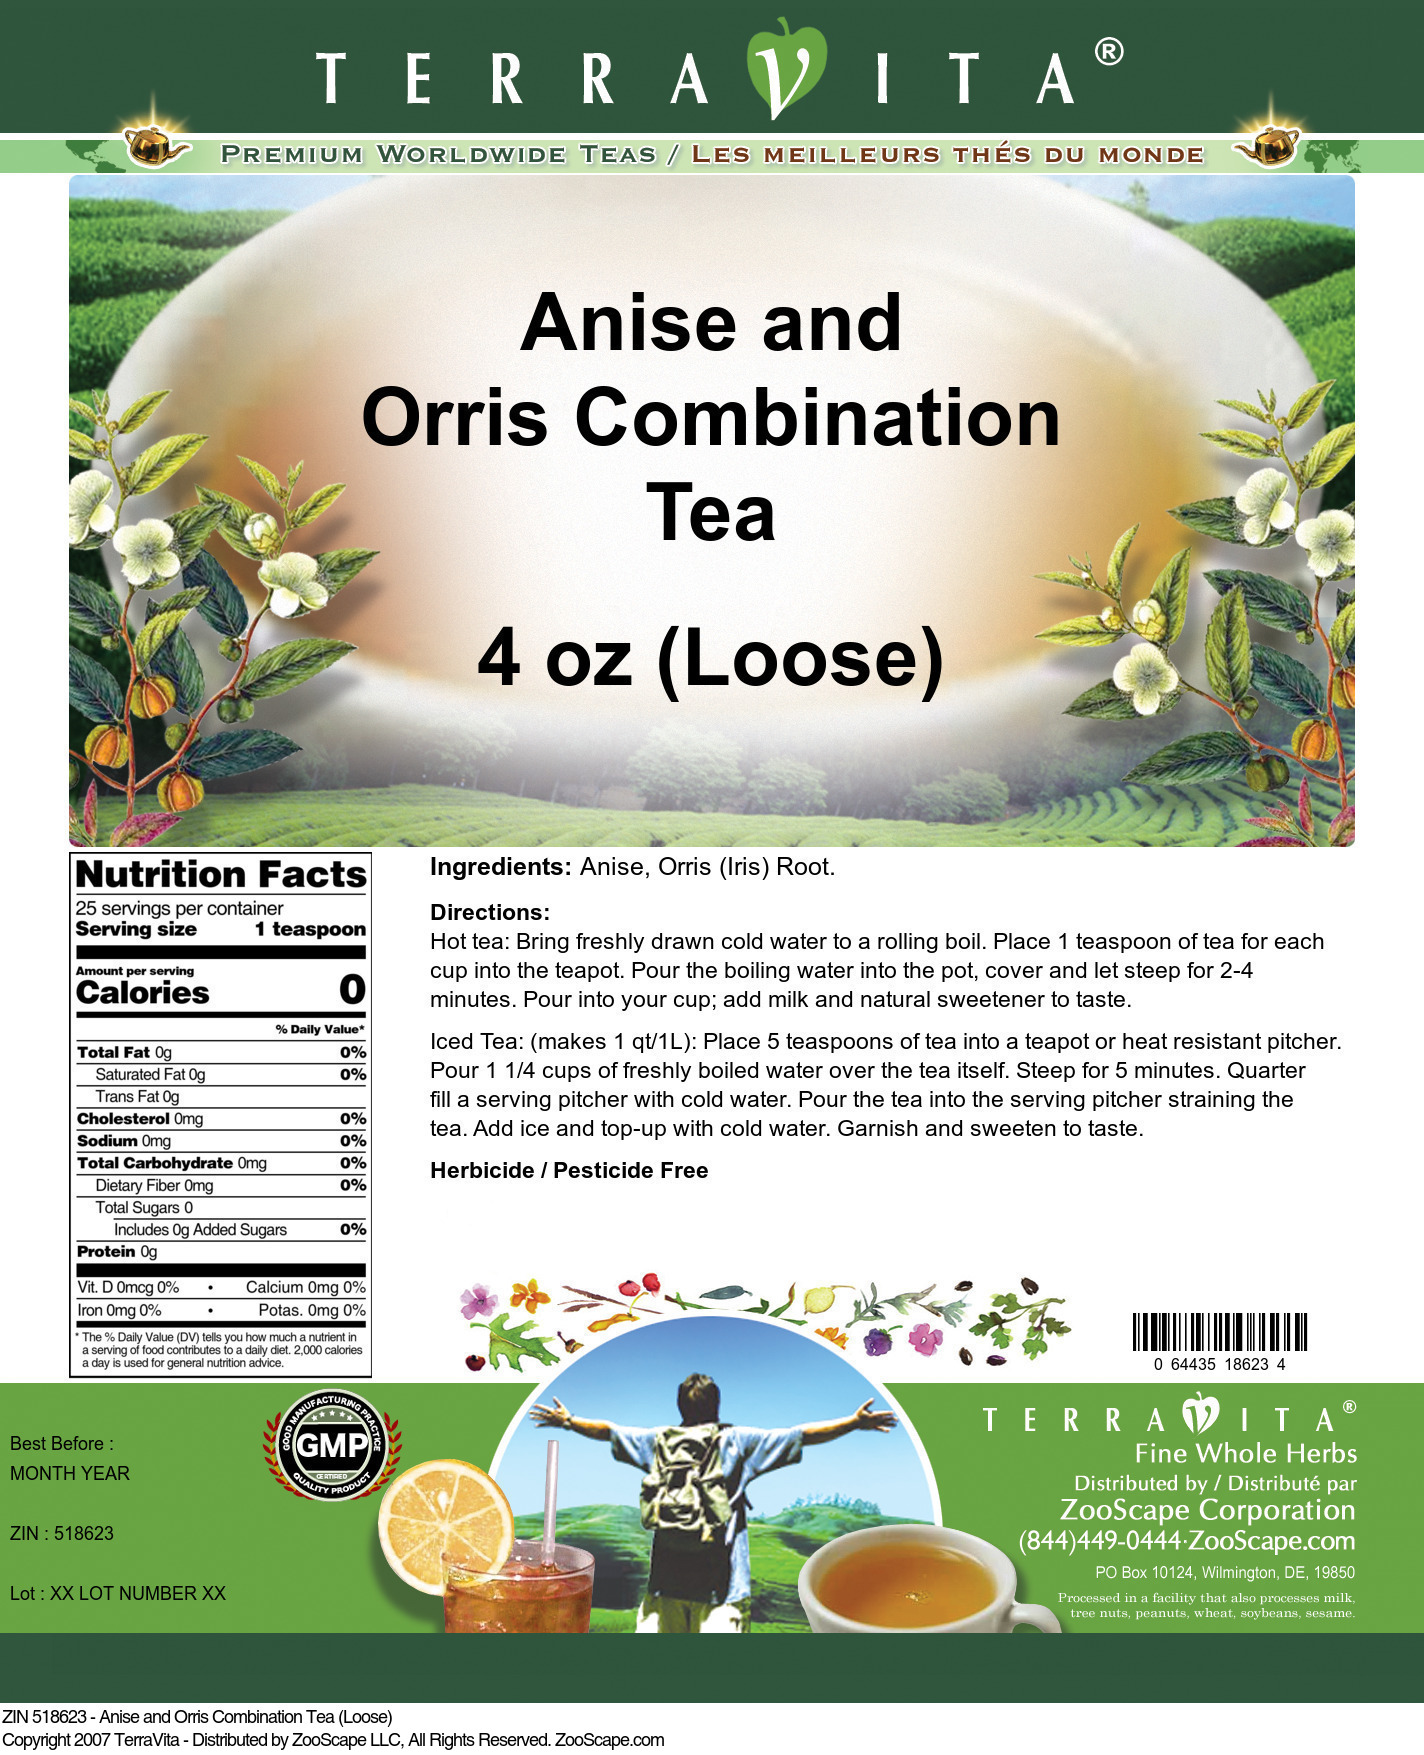 Anise and Orris Combination Tea (Loose) - Label